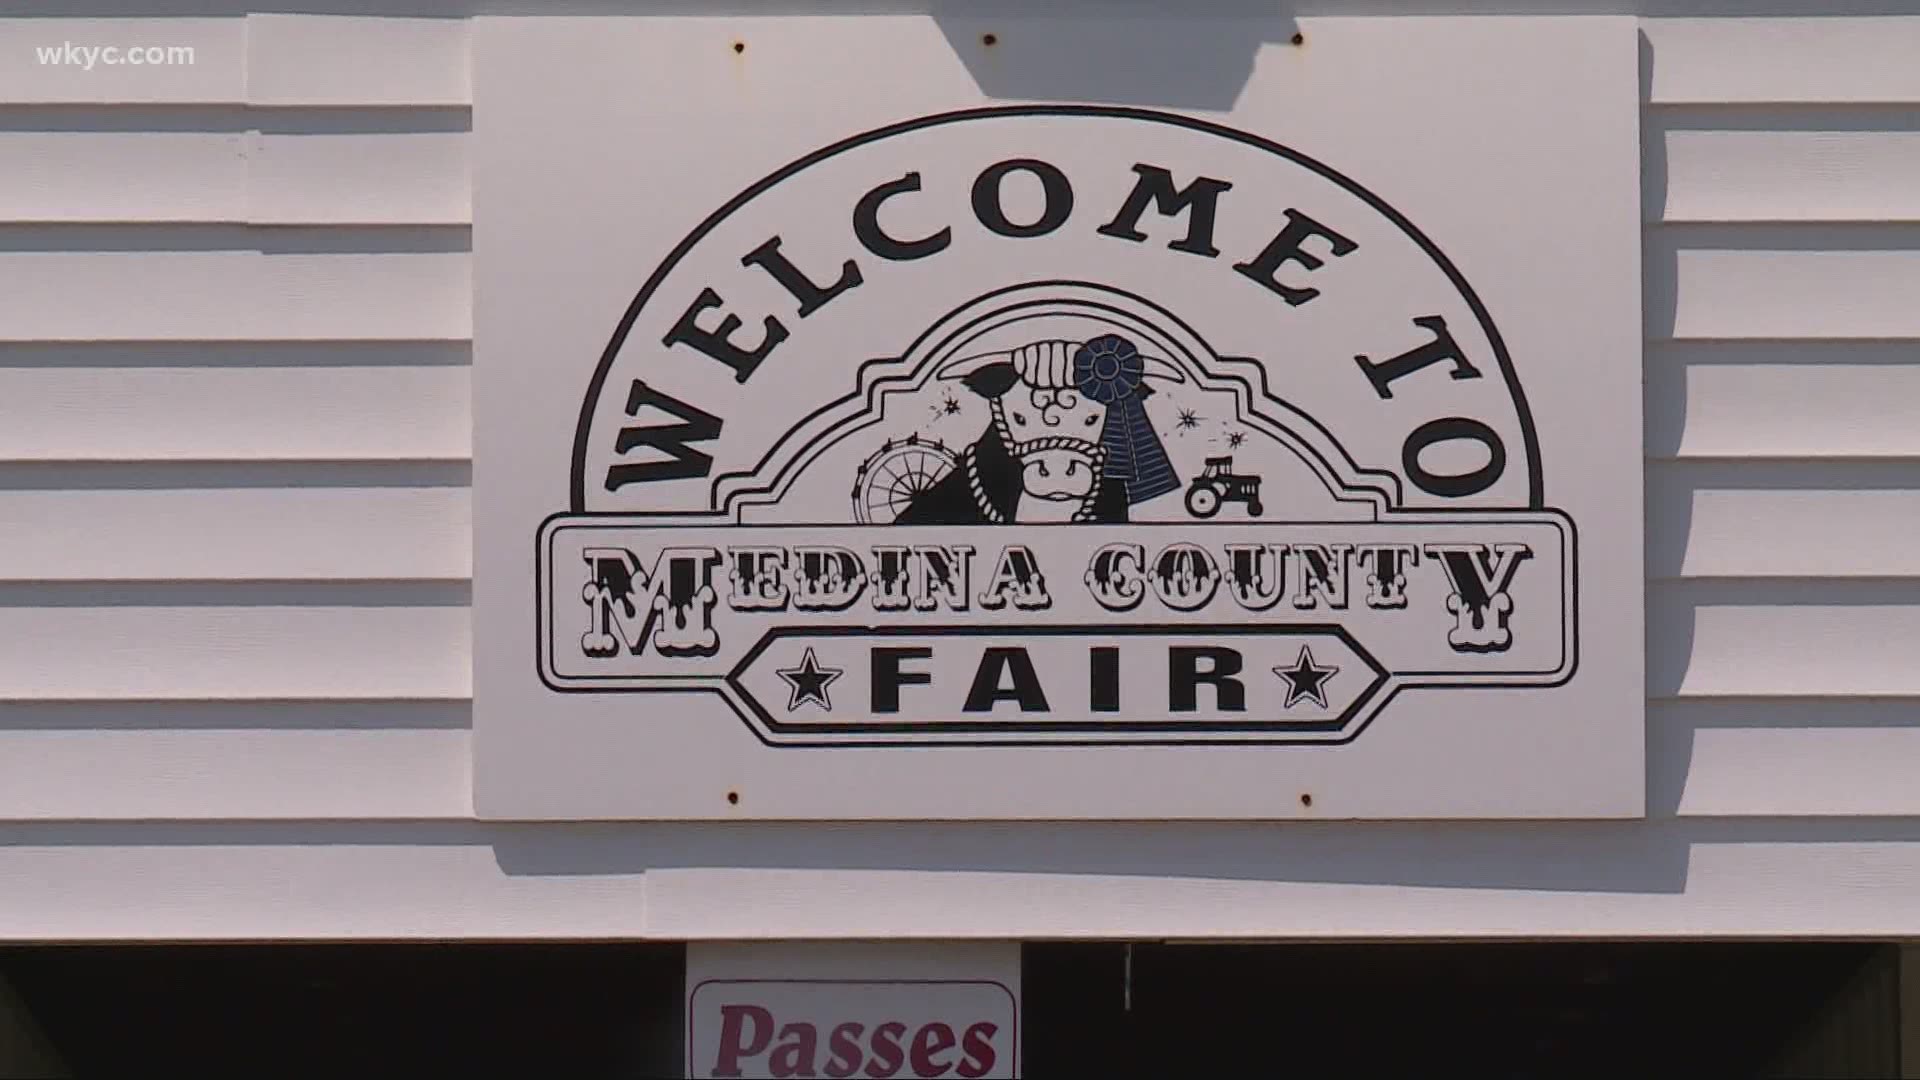 The Medina County Fair is a little different this year due to coronavirus. Organizers still want to make the occasion special for youngsters.